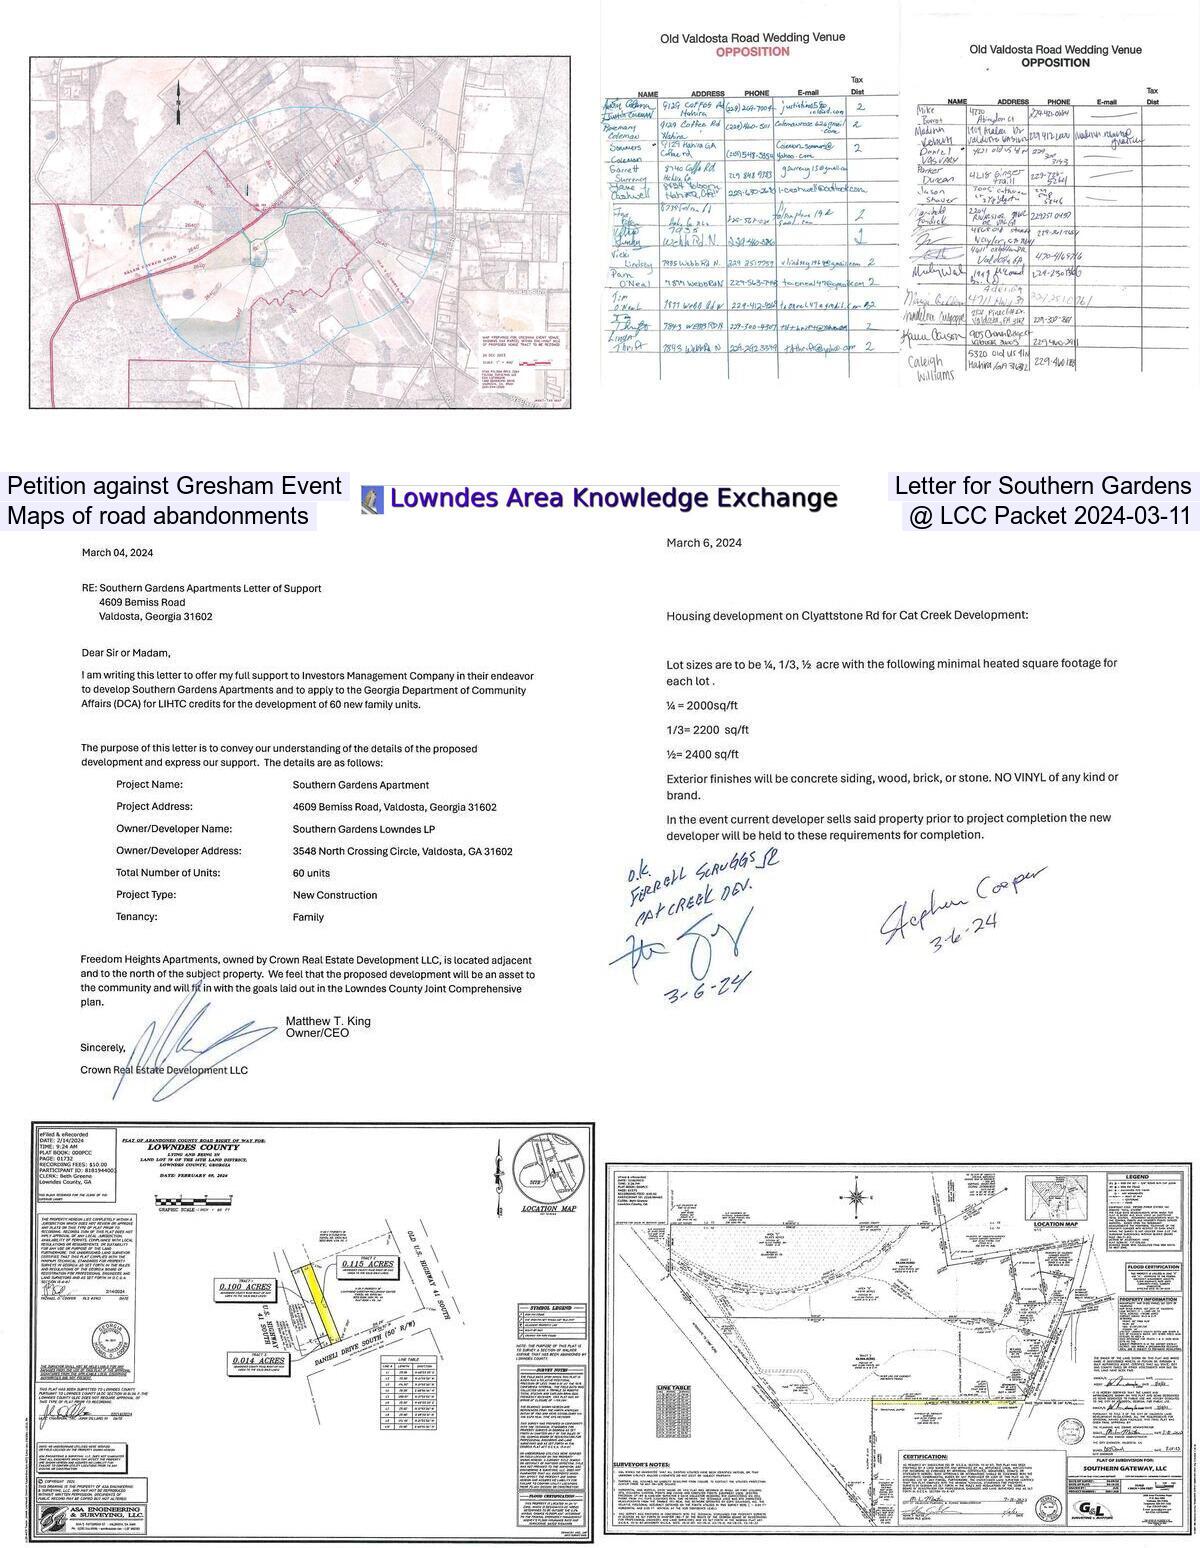 [Collage @ LCC Packet 2024-03-11]